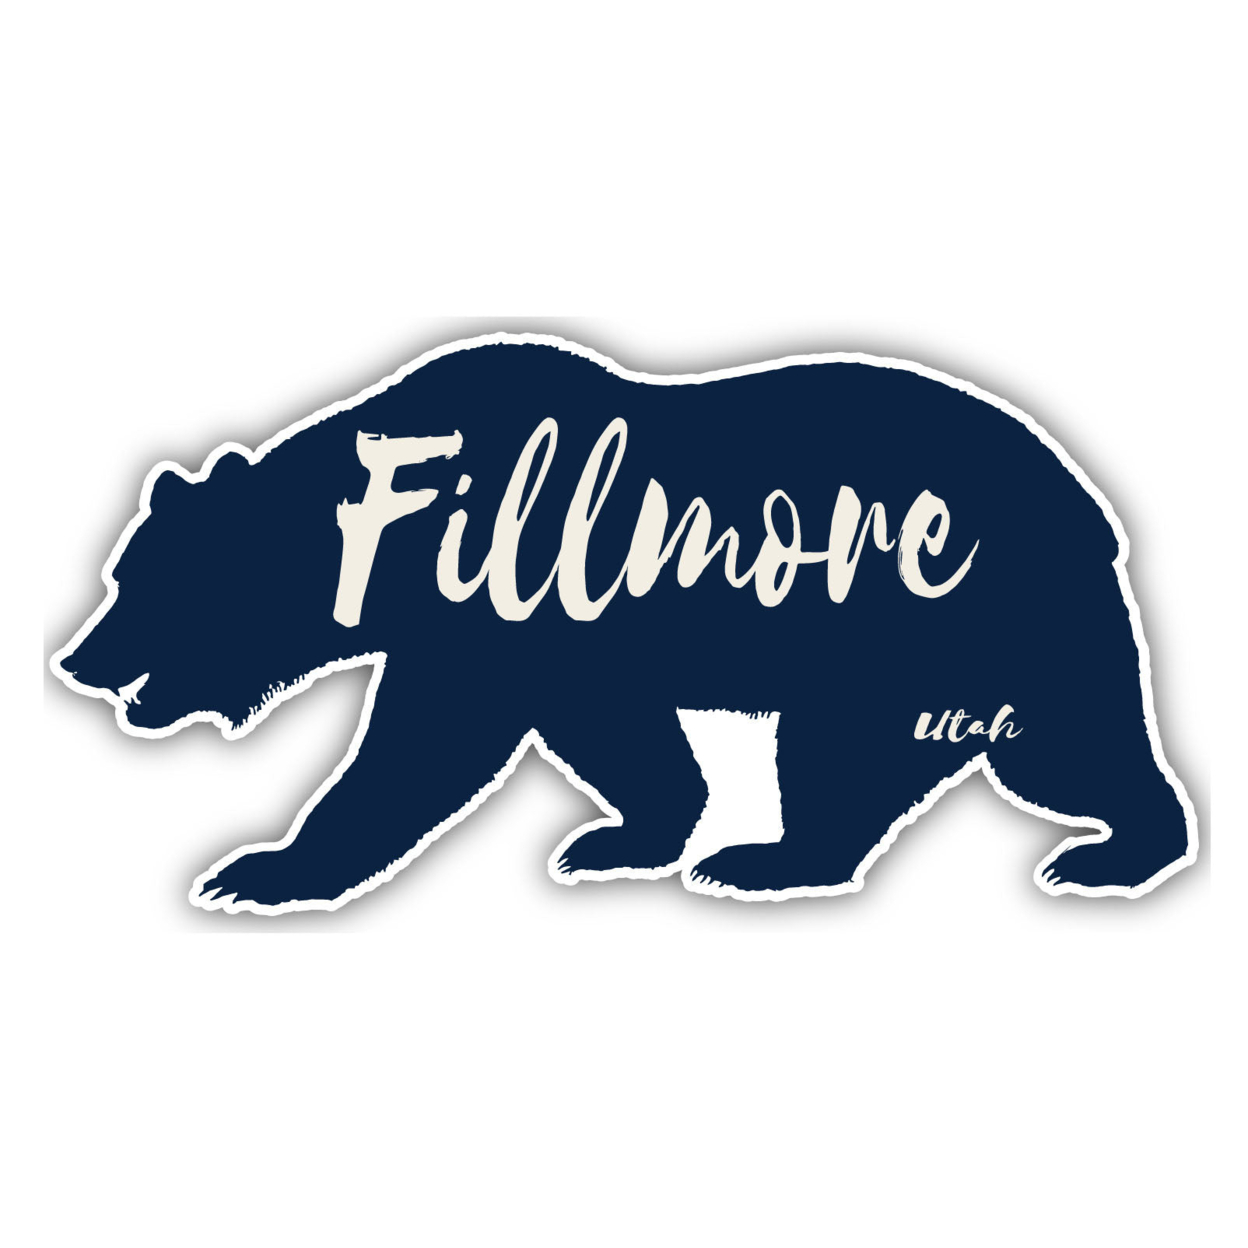 Fillmore Utah Souvenir Decorative Stickers (Choose Theme And Size) - 4-Pack, 4-Inch, Bear